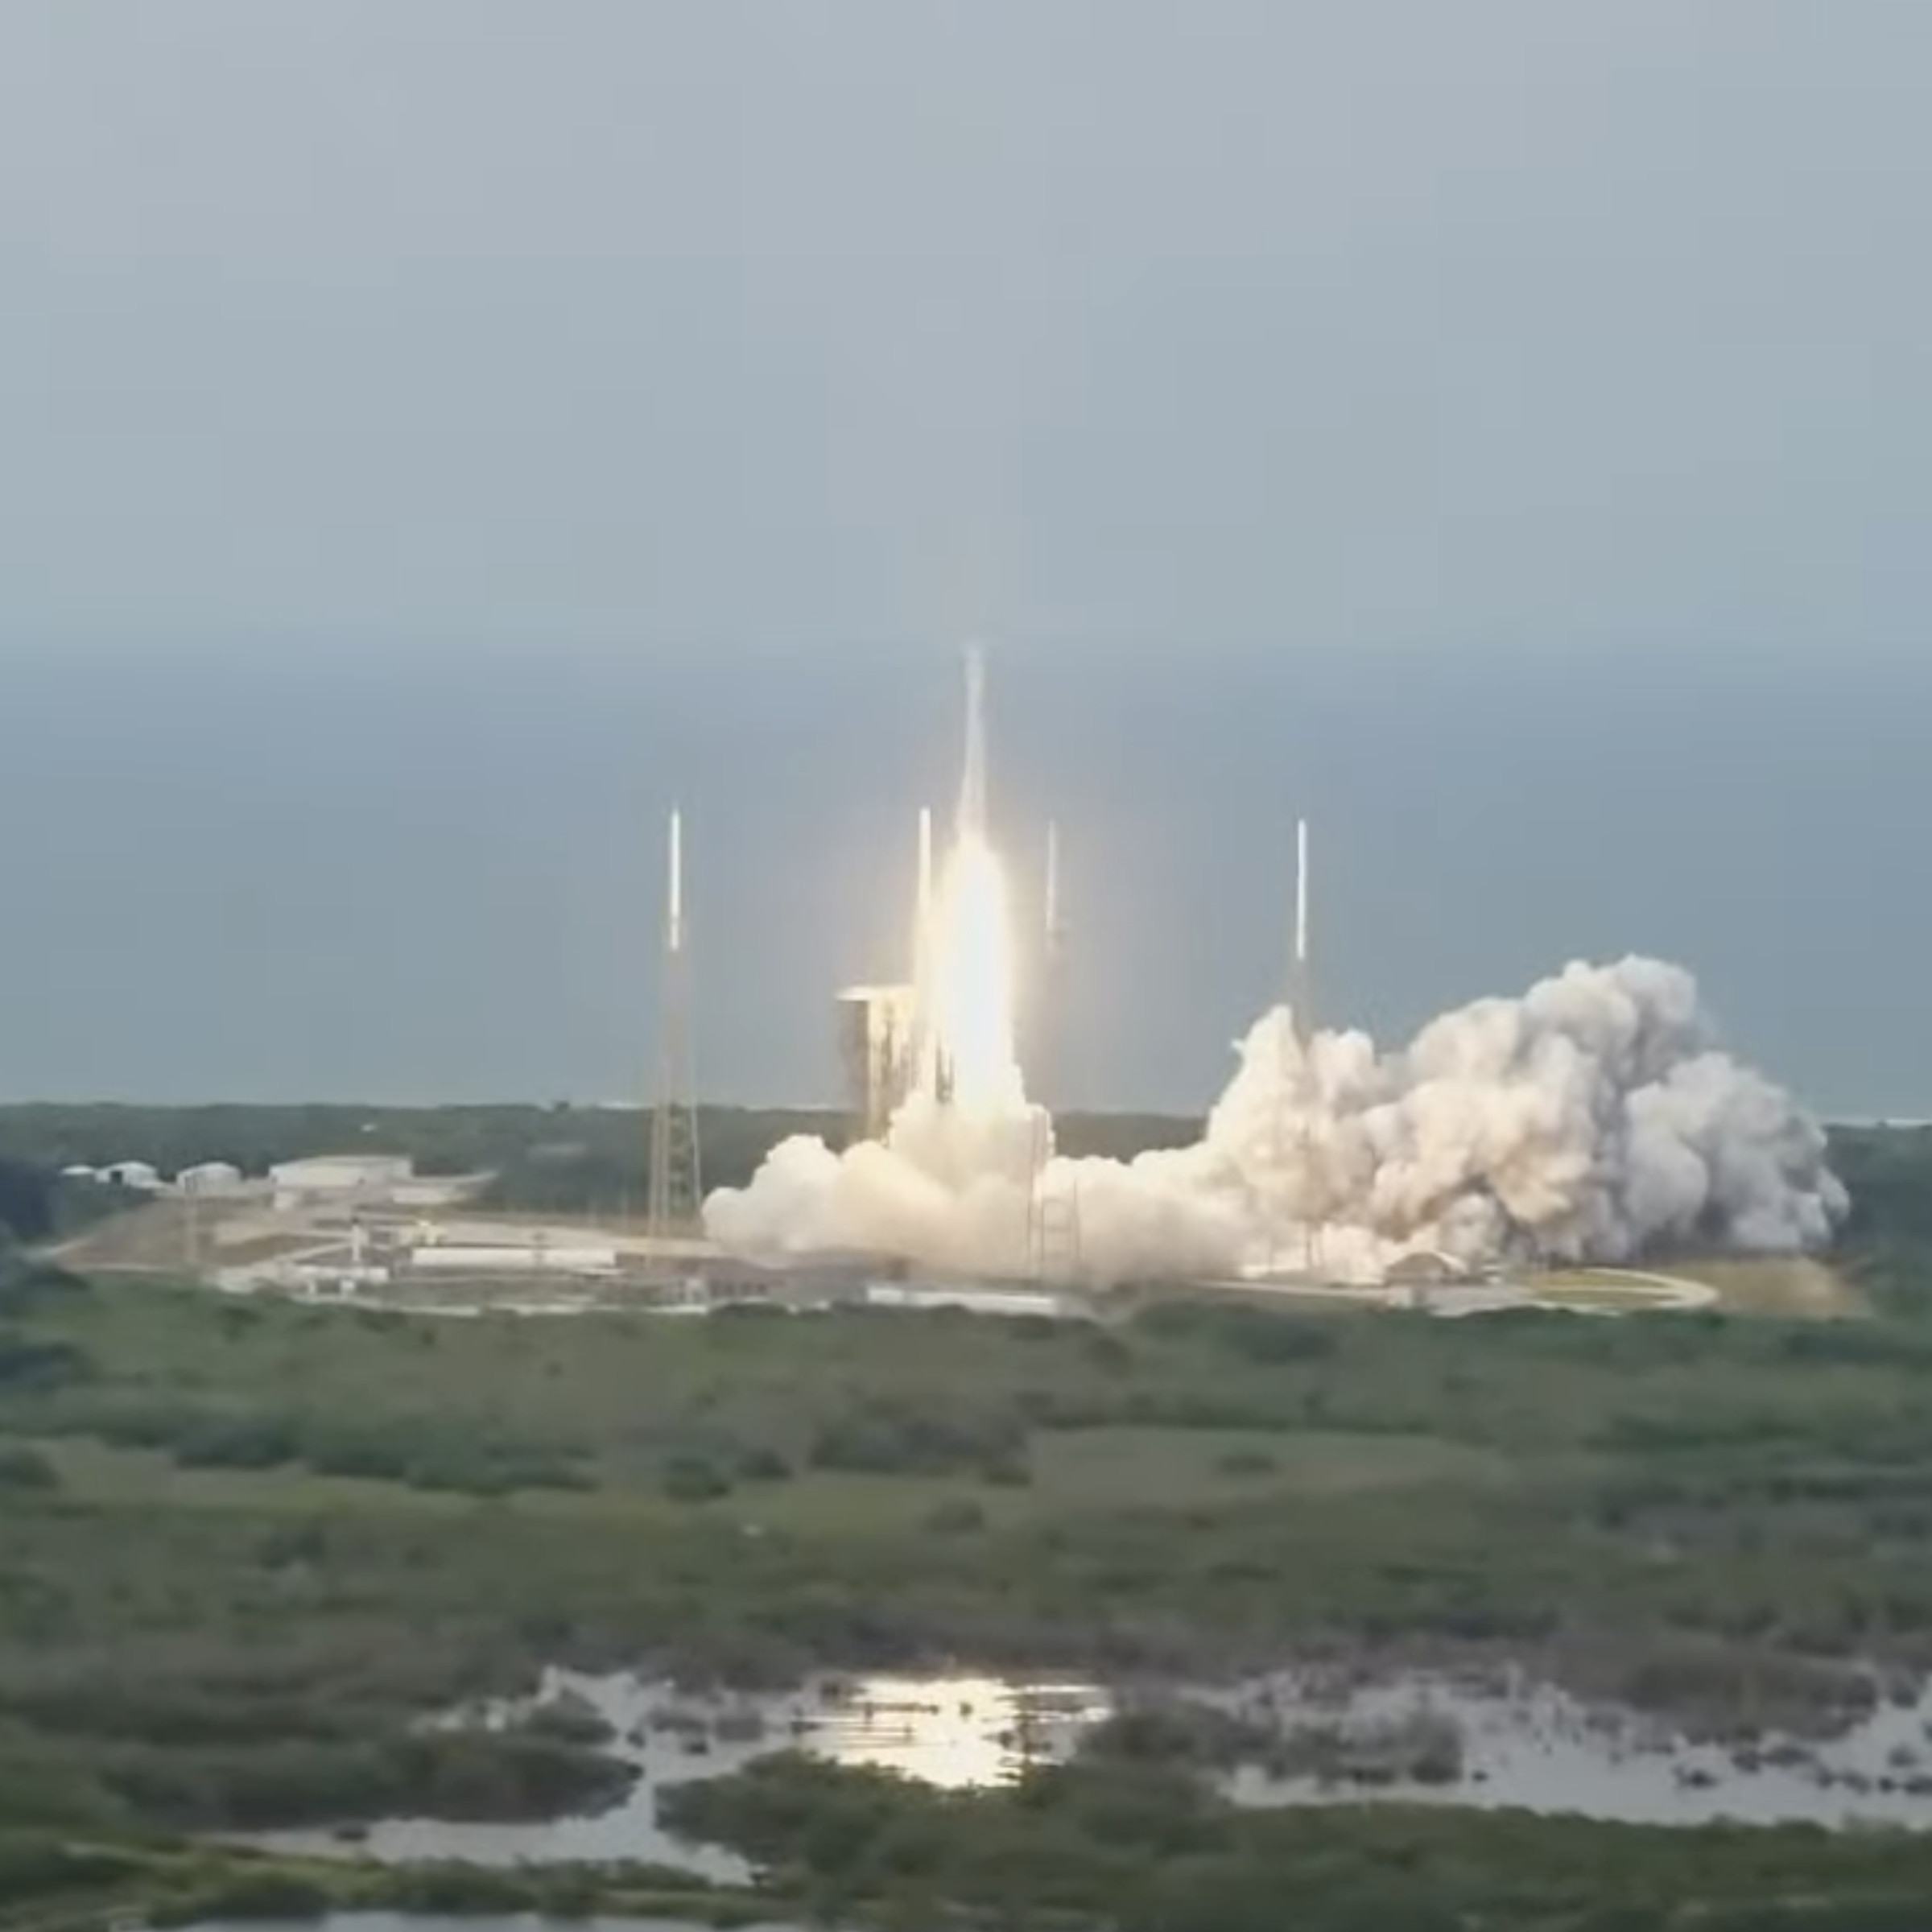 A rocket taking off on a cloudy day with a swamp in the foreground